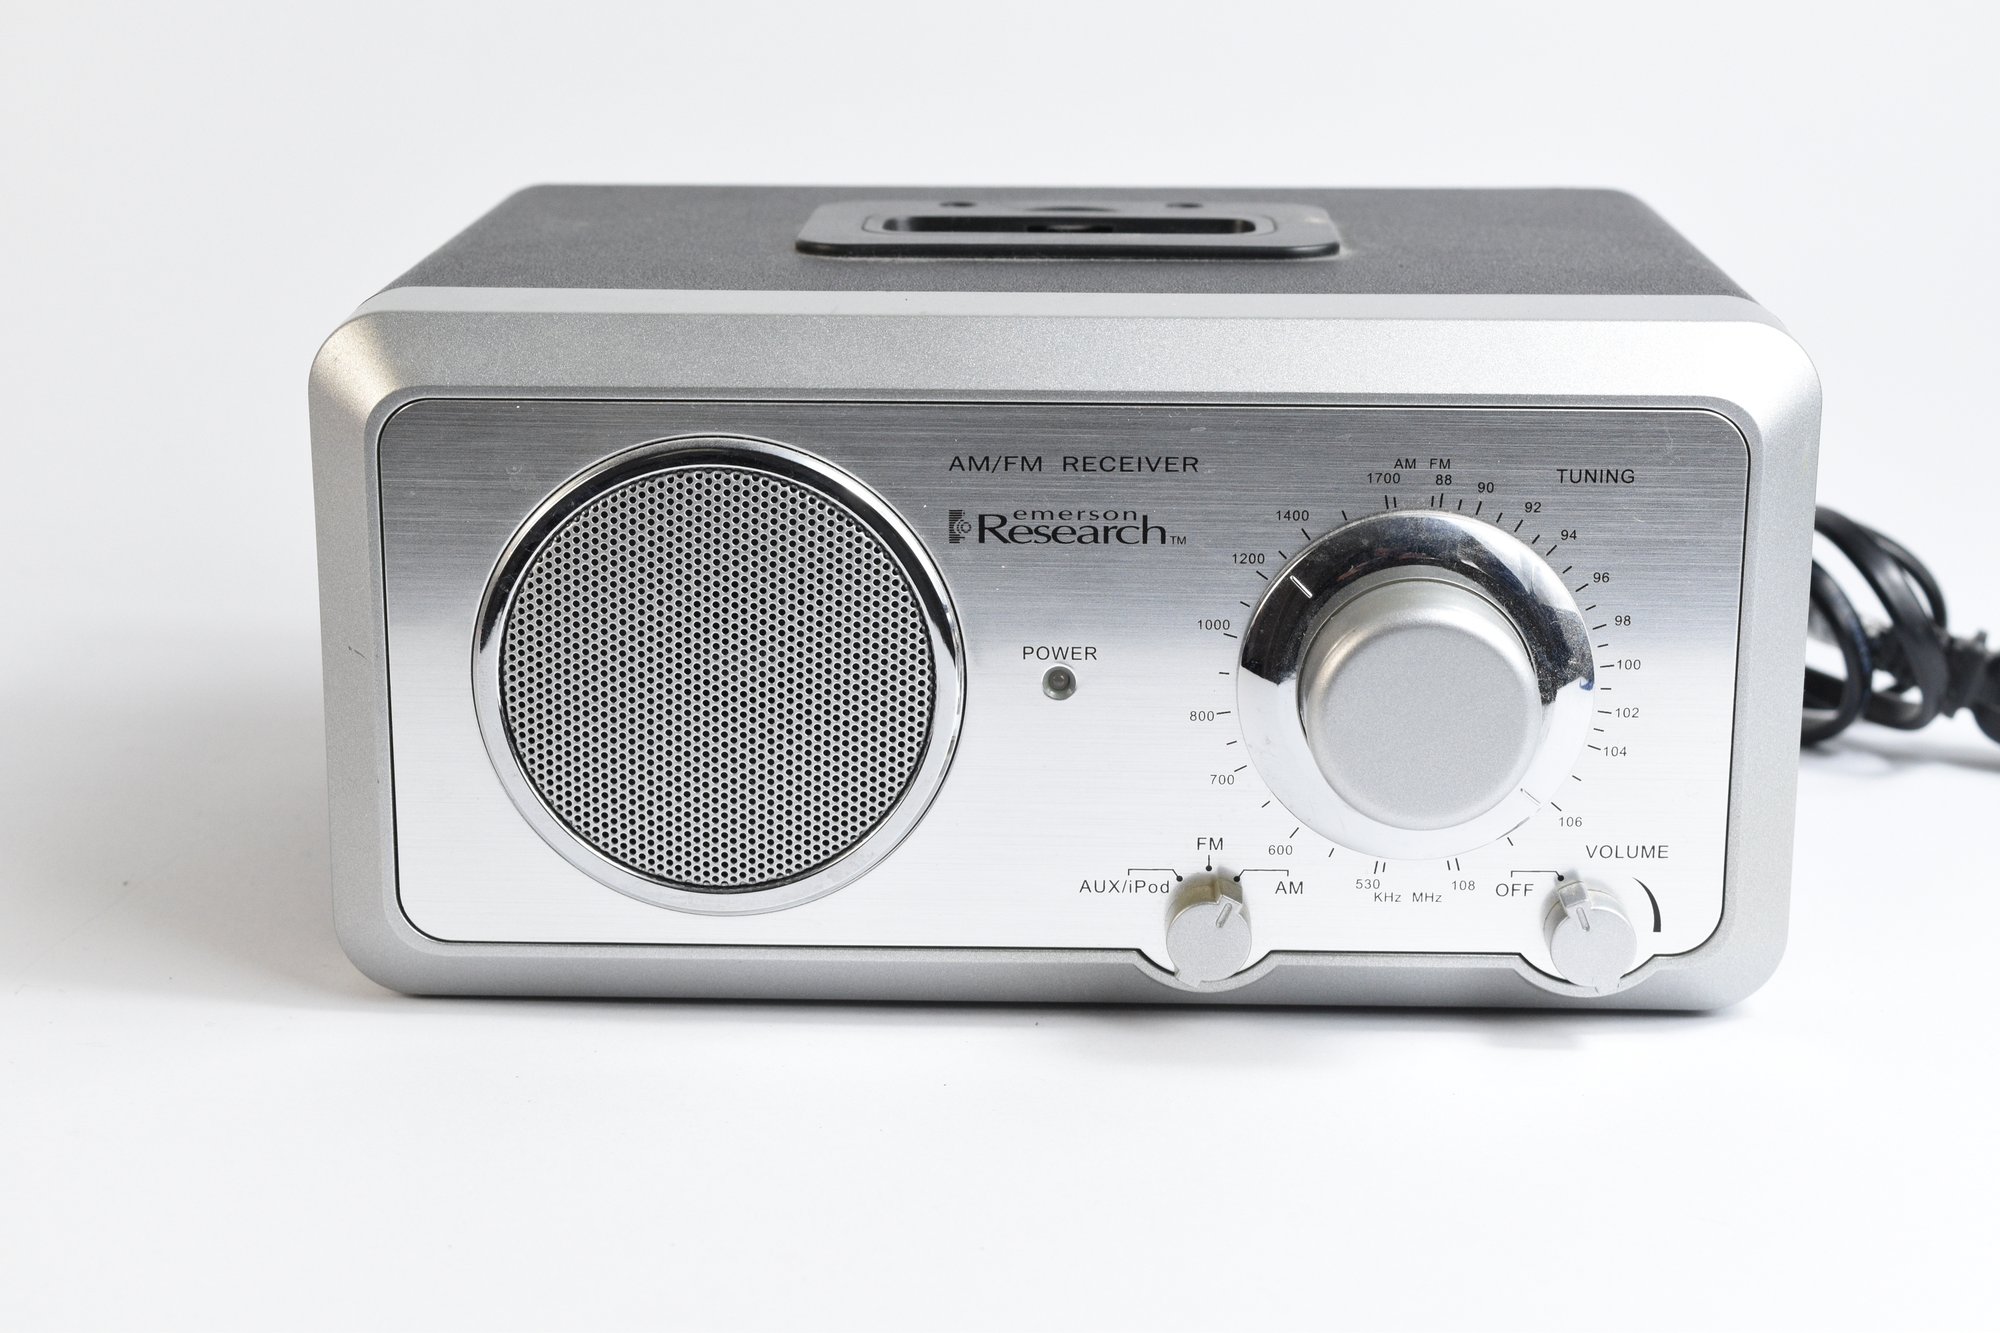 Emerson Research Model No.iR30 AM/FM Receiver With IPod Dock #3317